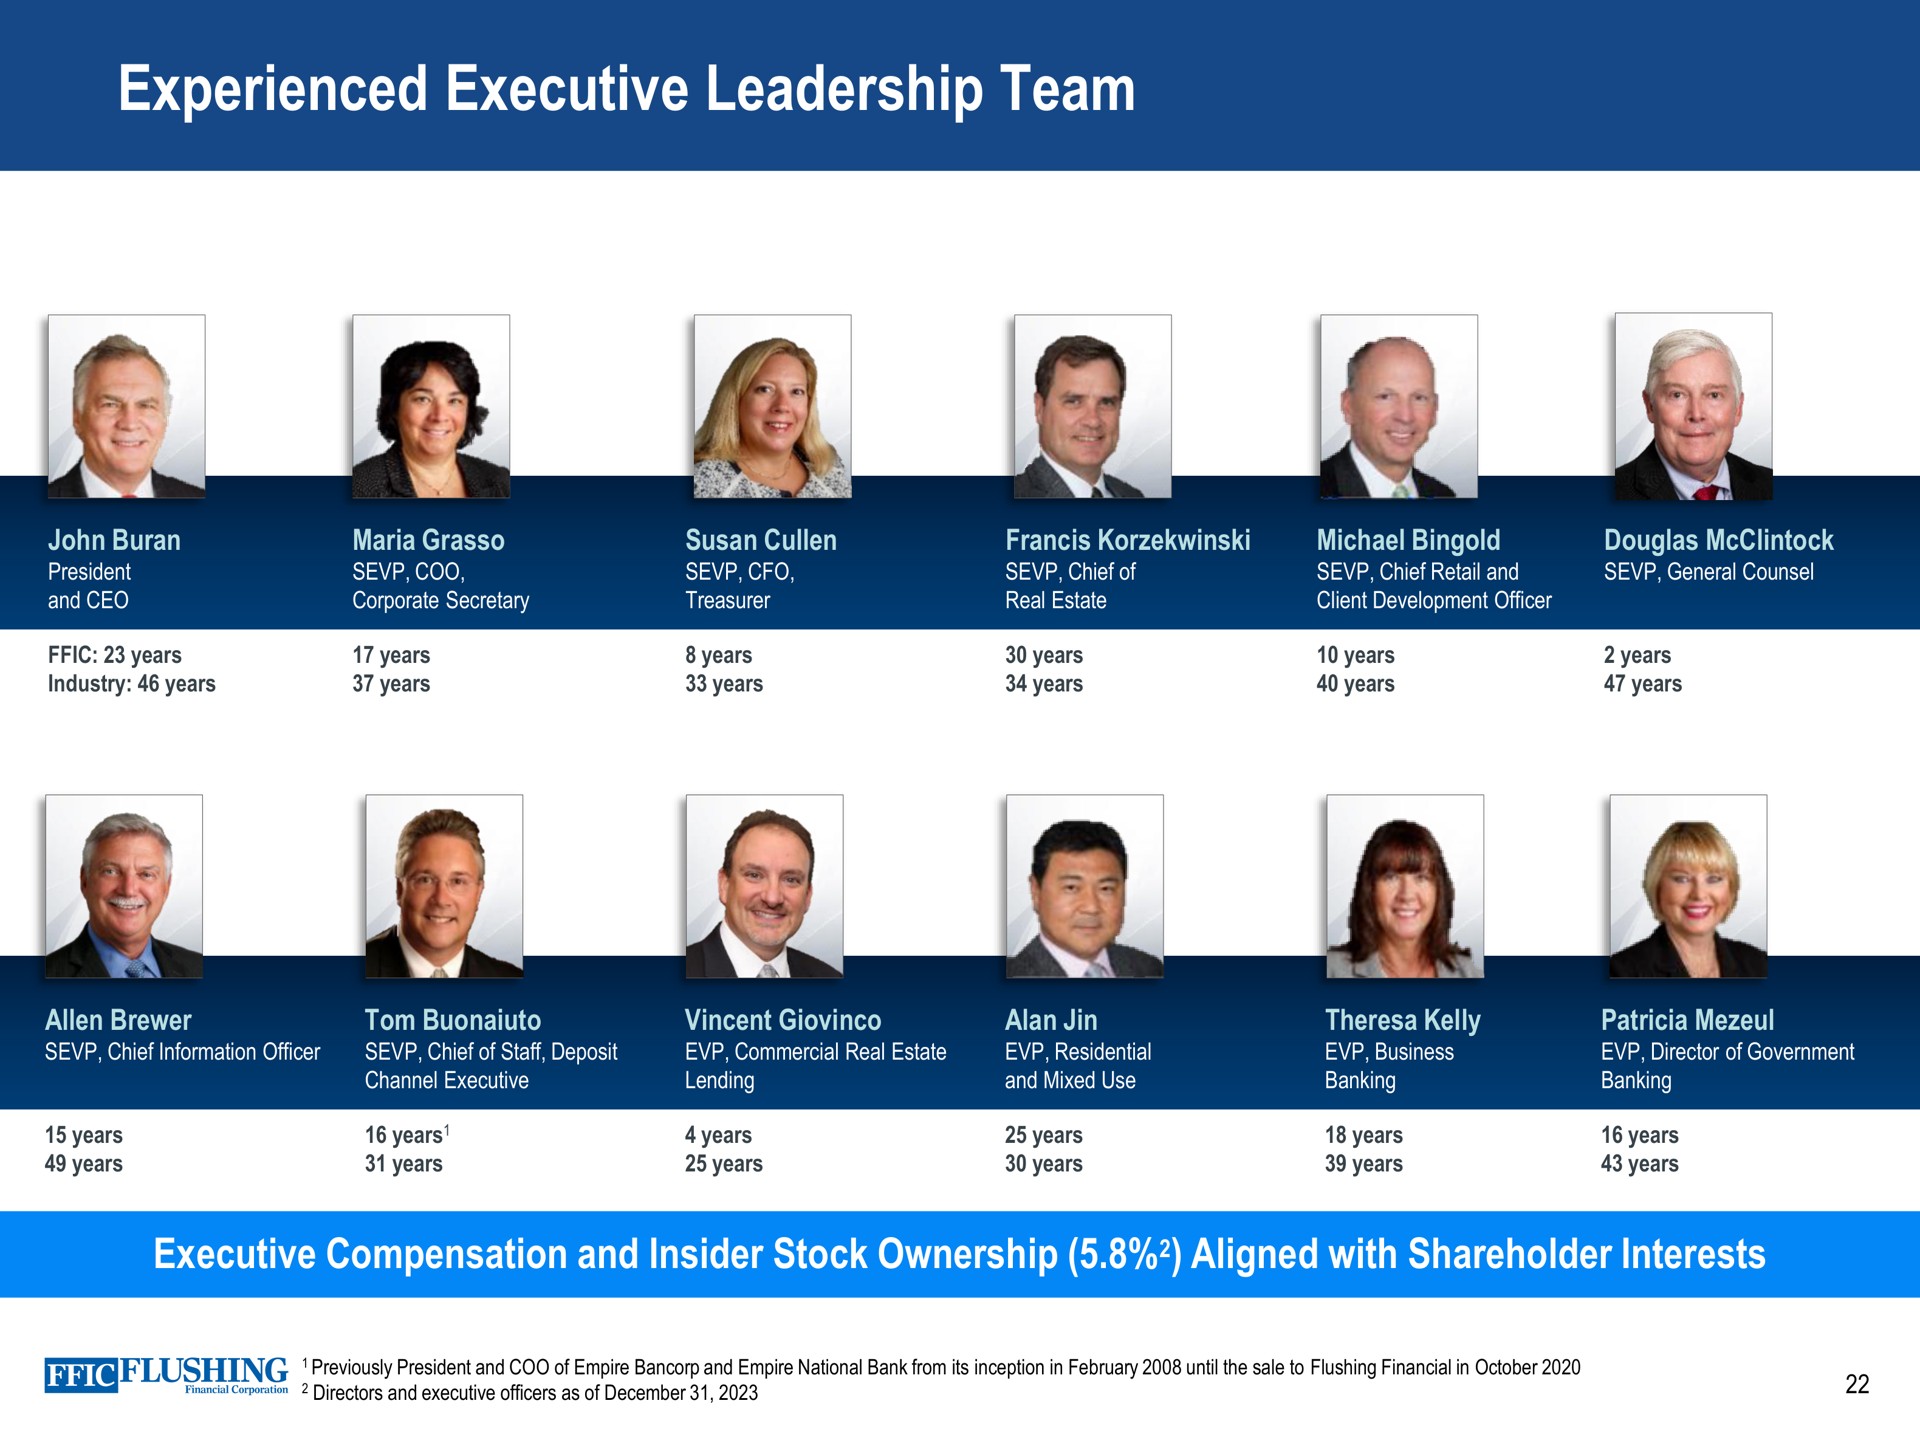 experienced executive leadership team chief of a cum client development officer maria coo corporate secretary general counsel treasurer and years industry years years years years years years years years years years years a brewer chief information officer chief of staff deposit channel vincent commercial real estate lending alan residential years years years years years years years years kelly beal years years we a director of government years years compensation and insider stock ownership aligned with shareholder interests flushing previously president and coo of empire and empire national bank from its inception in until the sale to flushing financial in financial corporation directors and officers as of | Flushing Financial